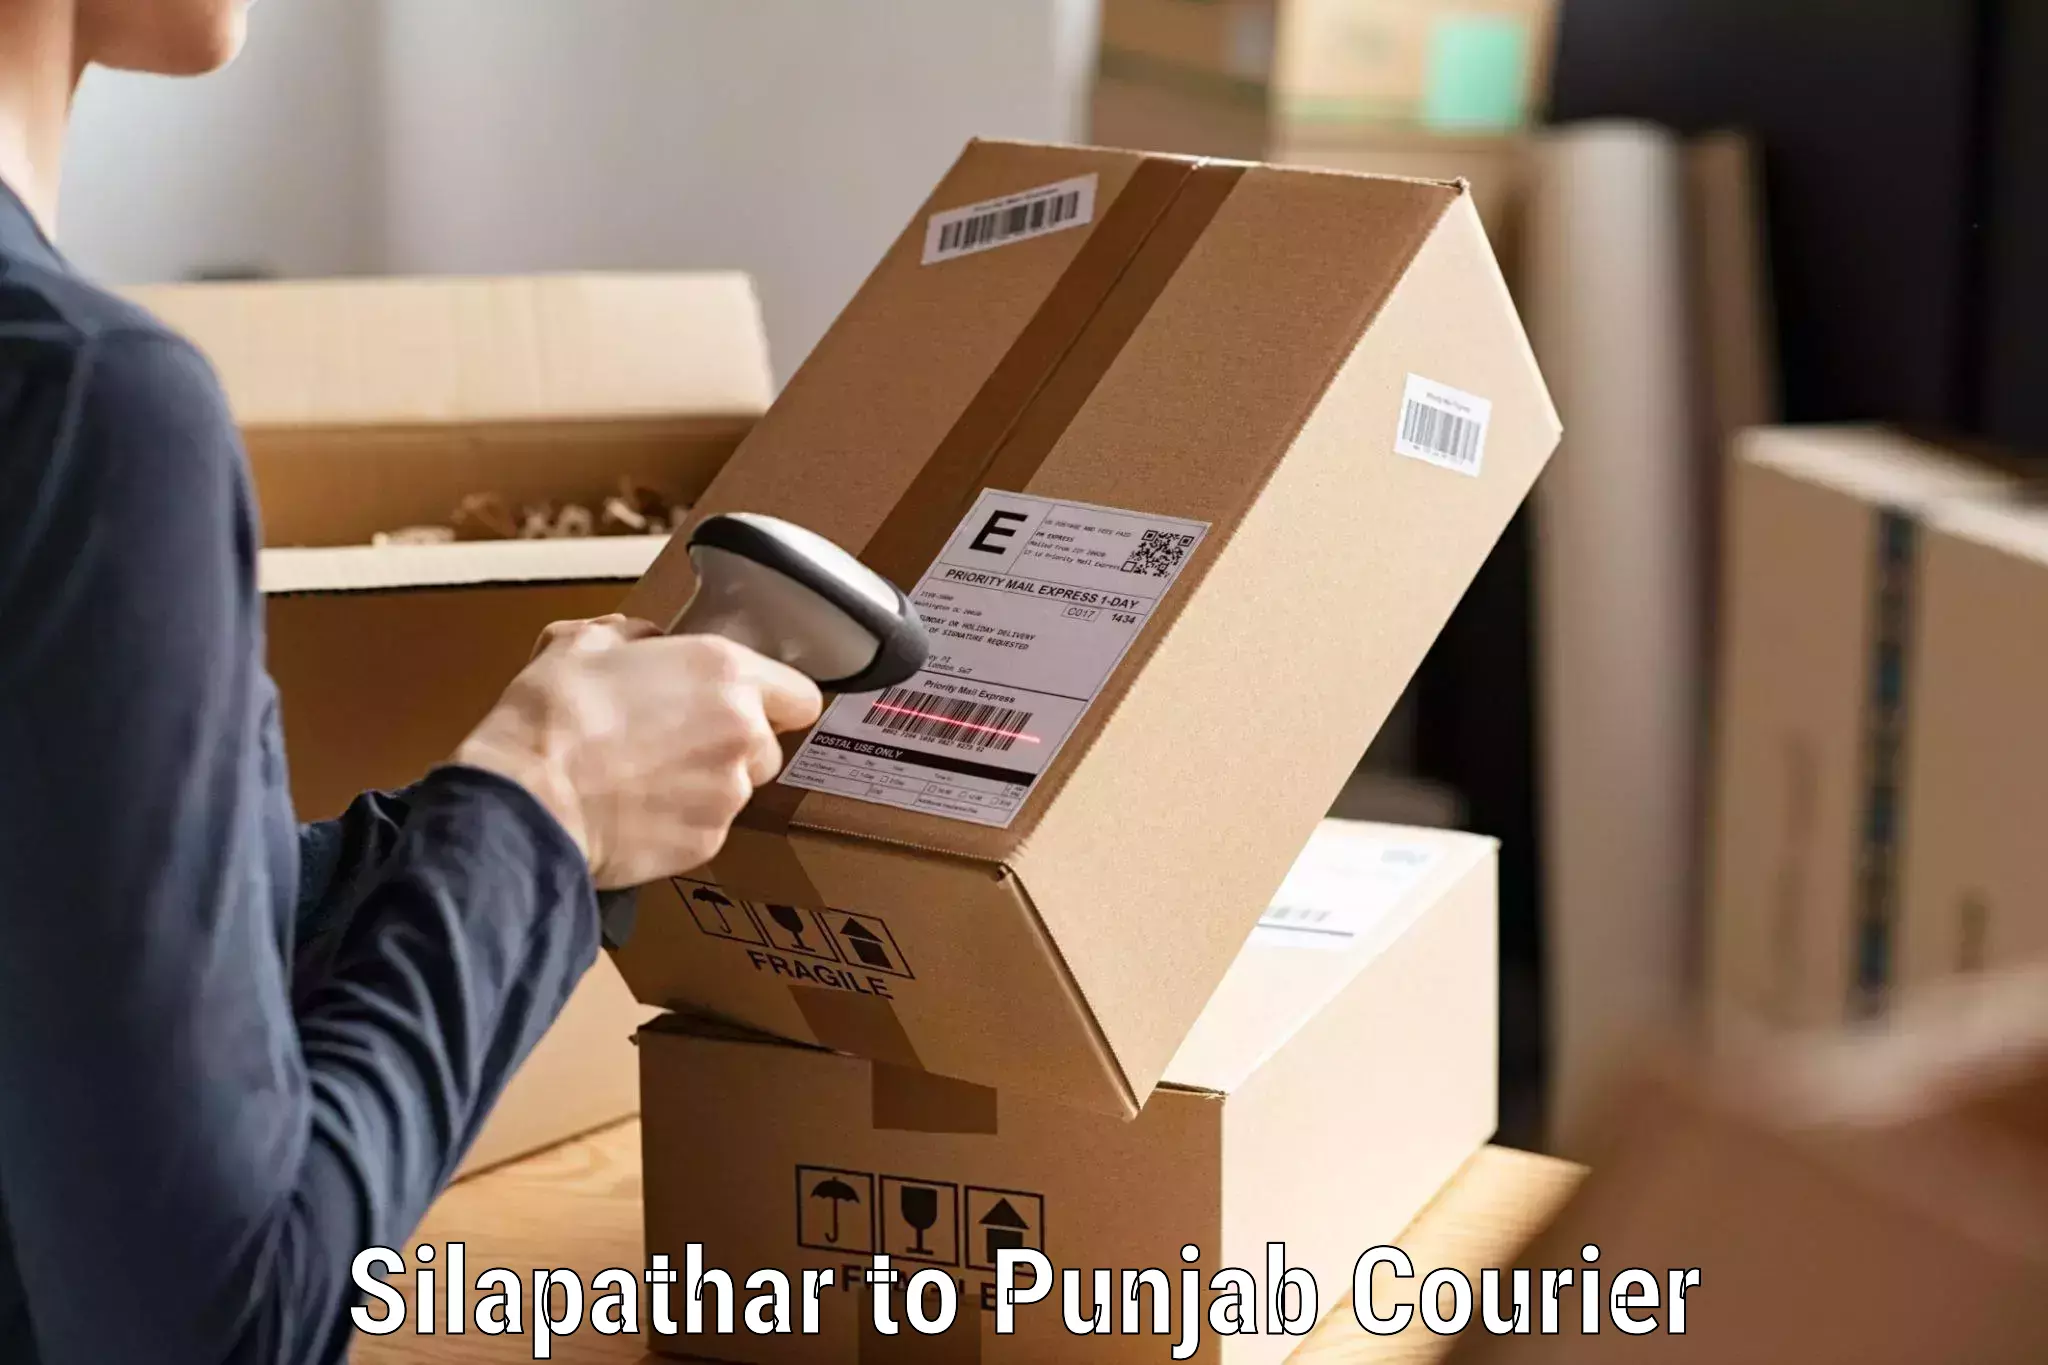 Same-day delivery solutions Silapathar to Zirakpur